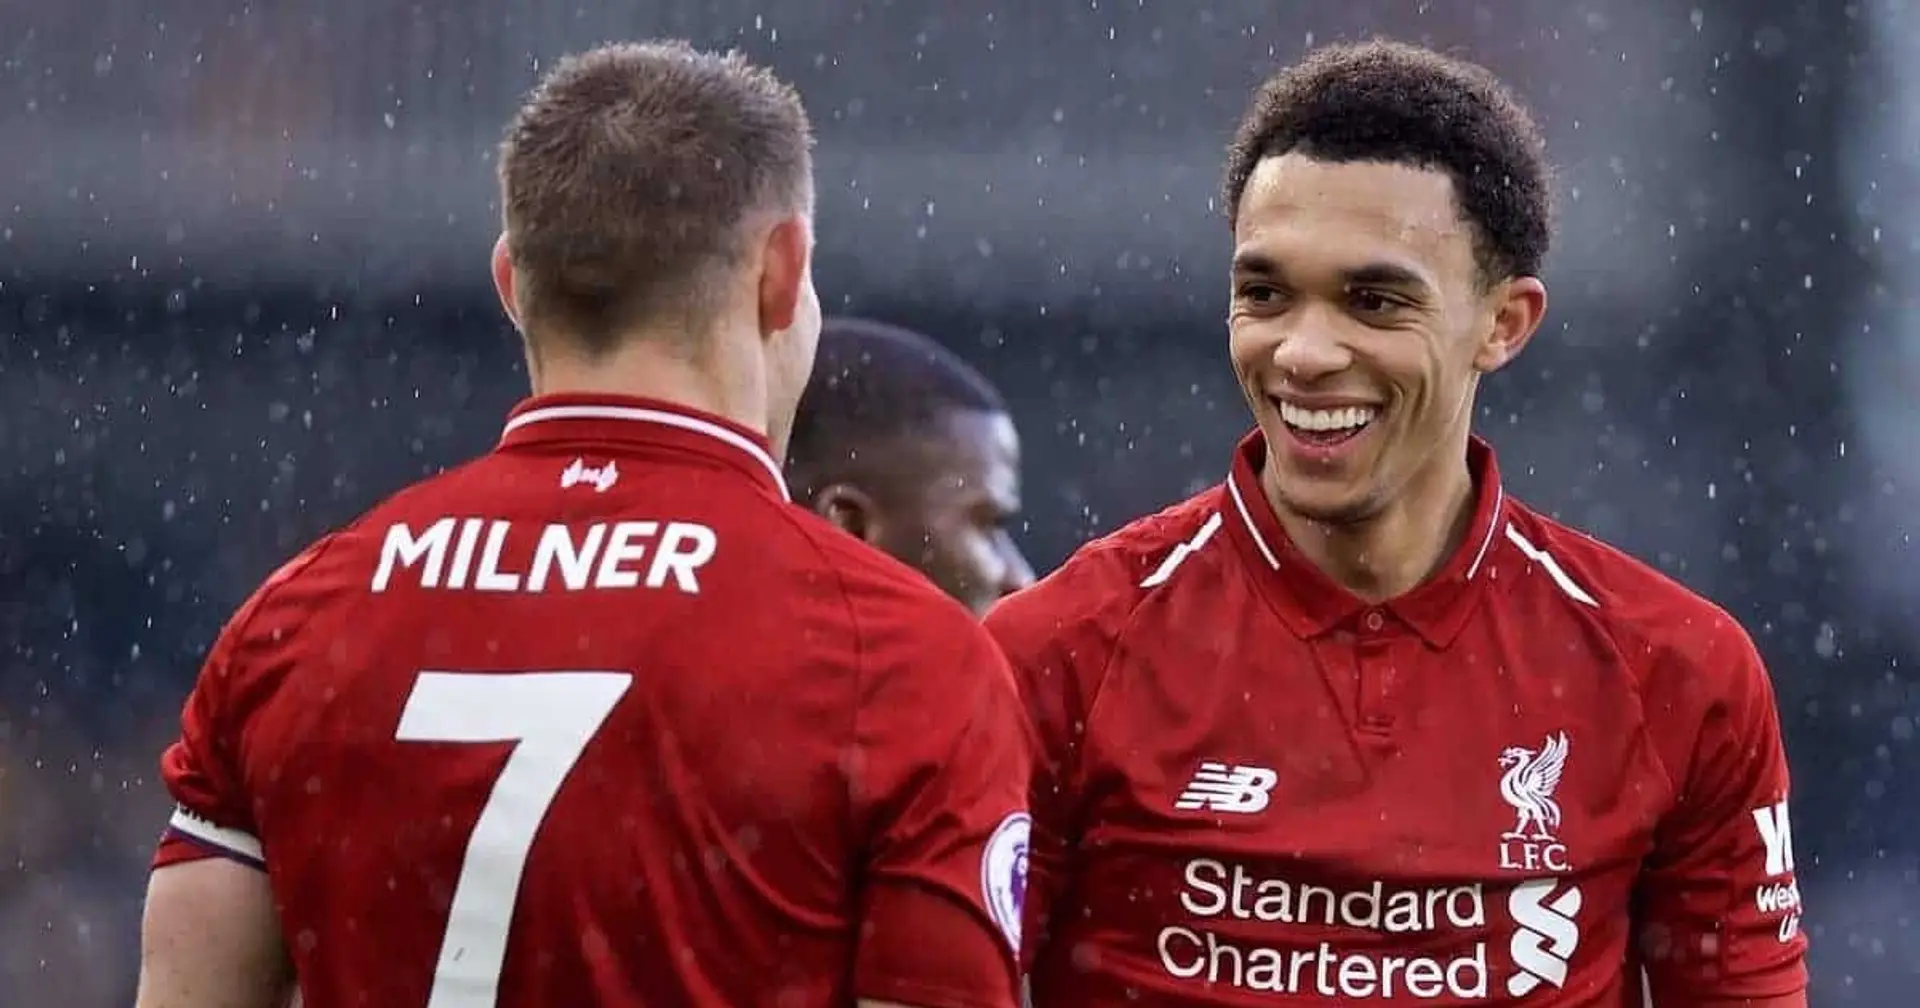 'It has to be him': Trent names Milner as the player with the best 'engine' in football